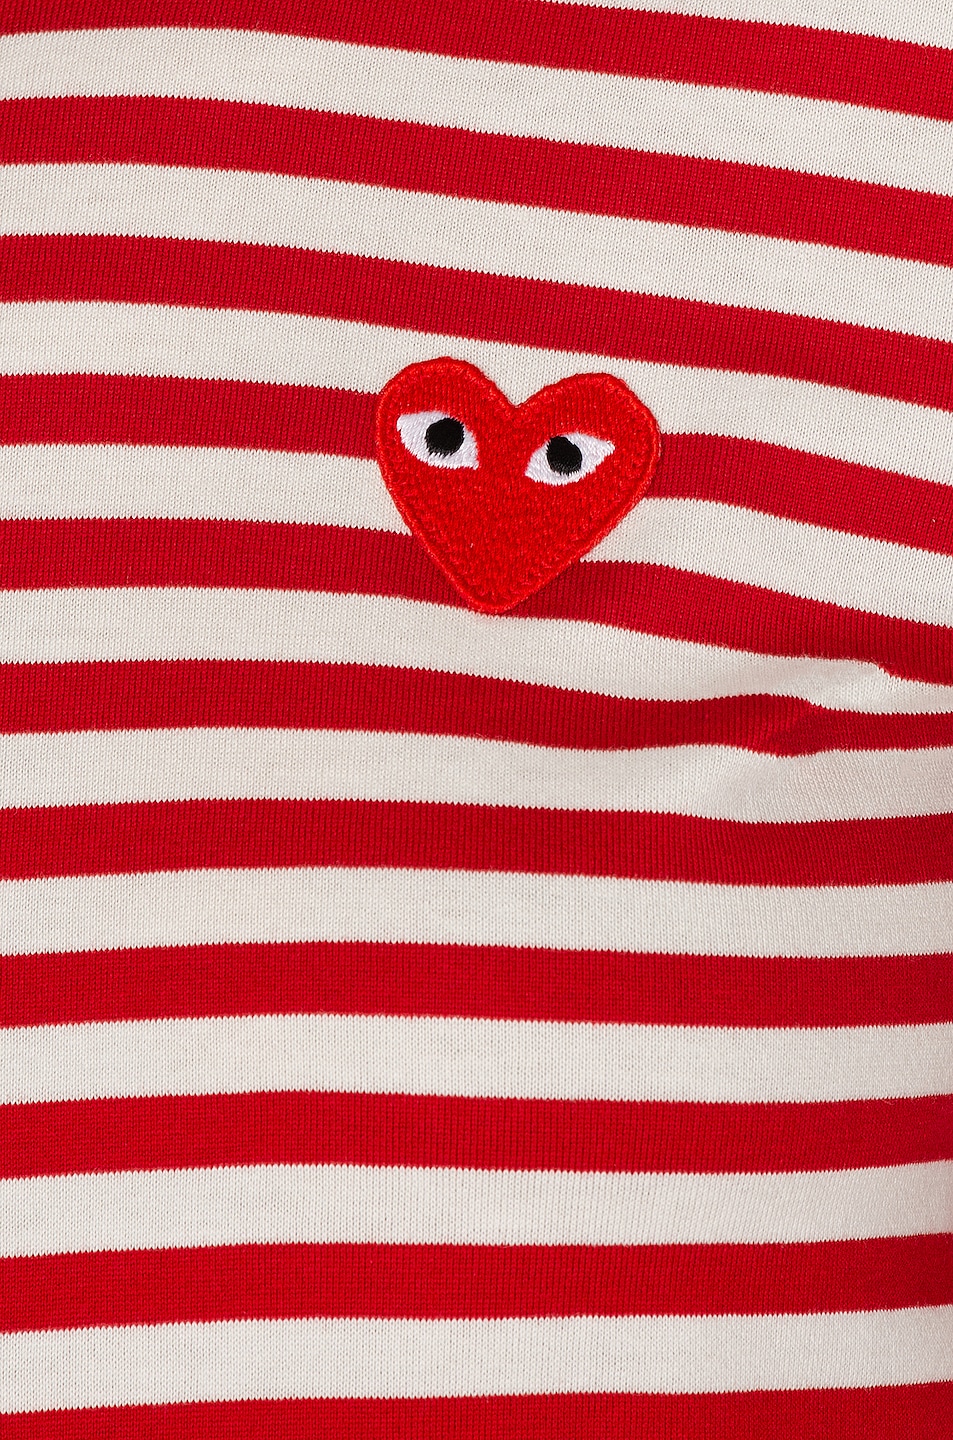 COMME des GARCONS PLAY Striped Cotton Red Emblem Tee in Red & White | FWRD